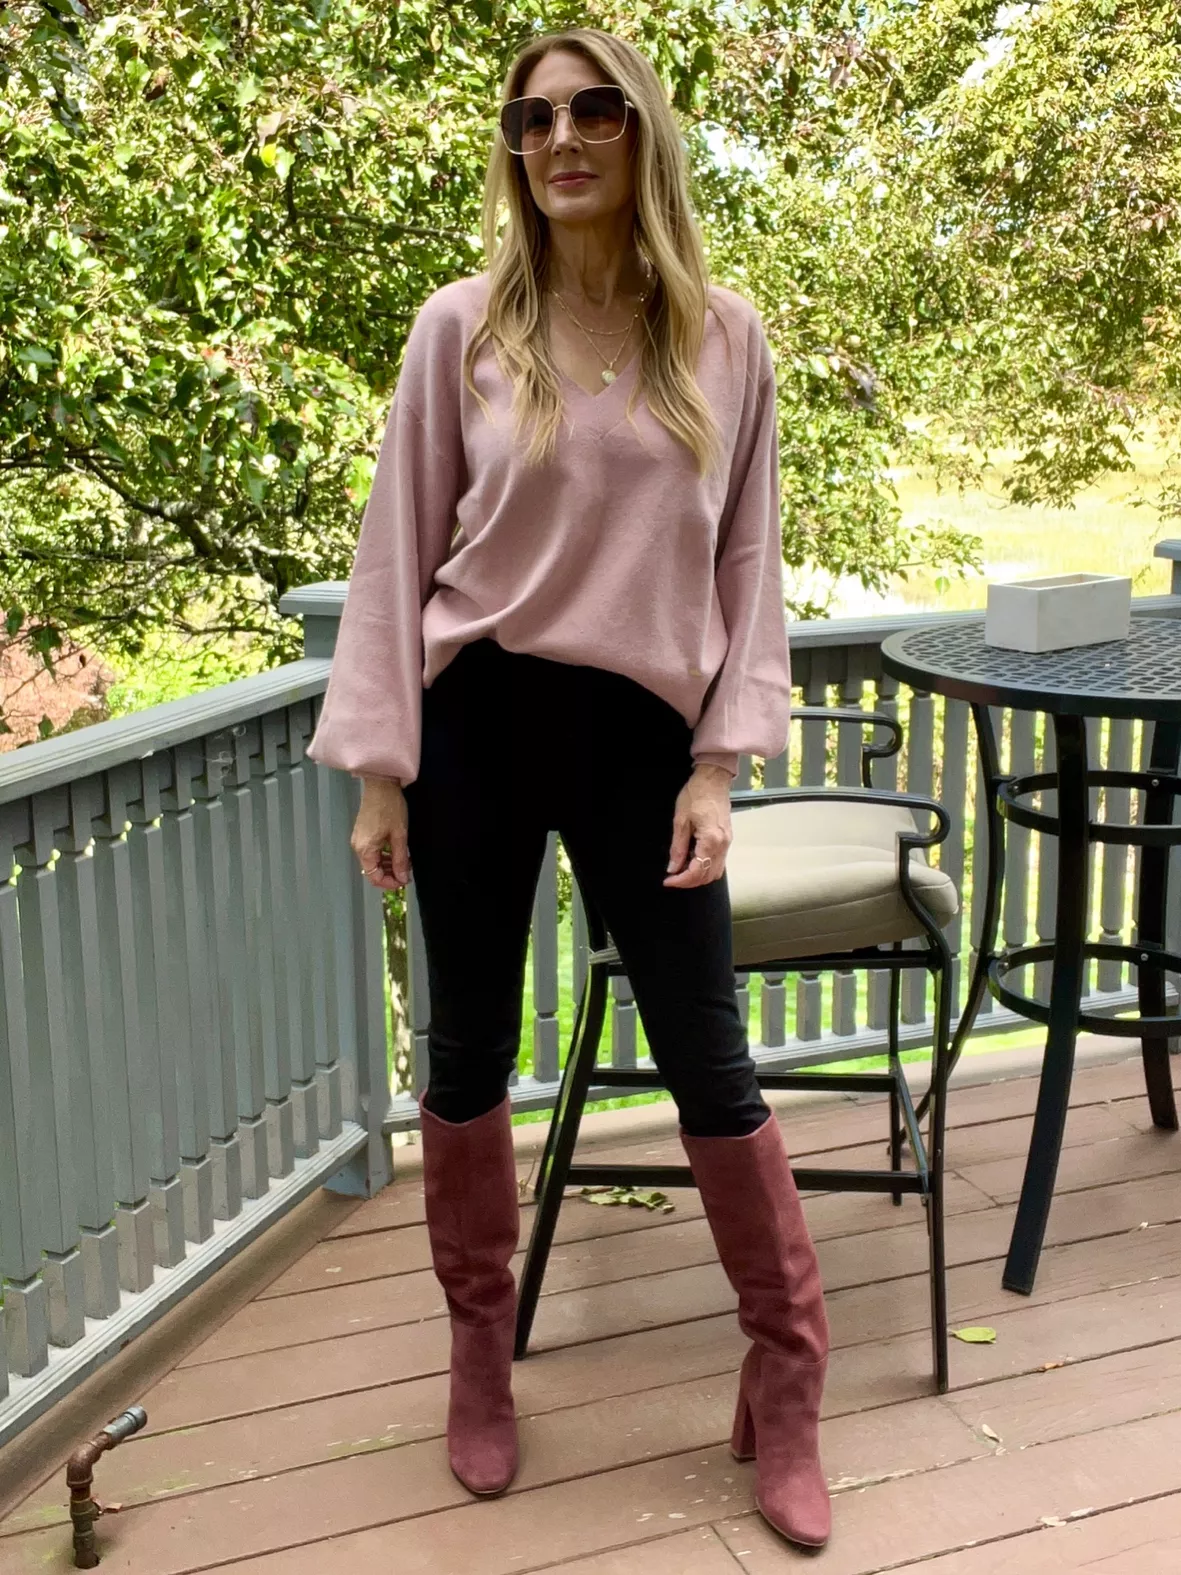 Knee High Boots Outfits - Shop Cute Knee High Boots